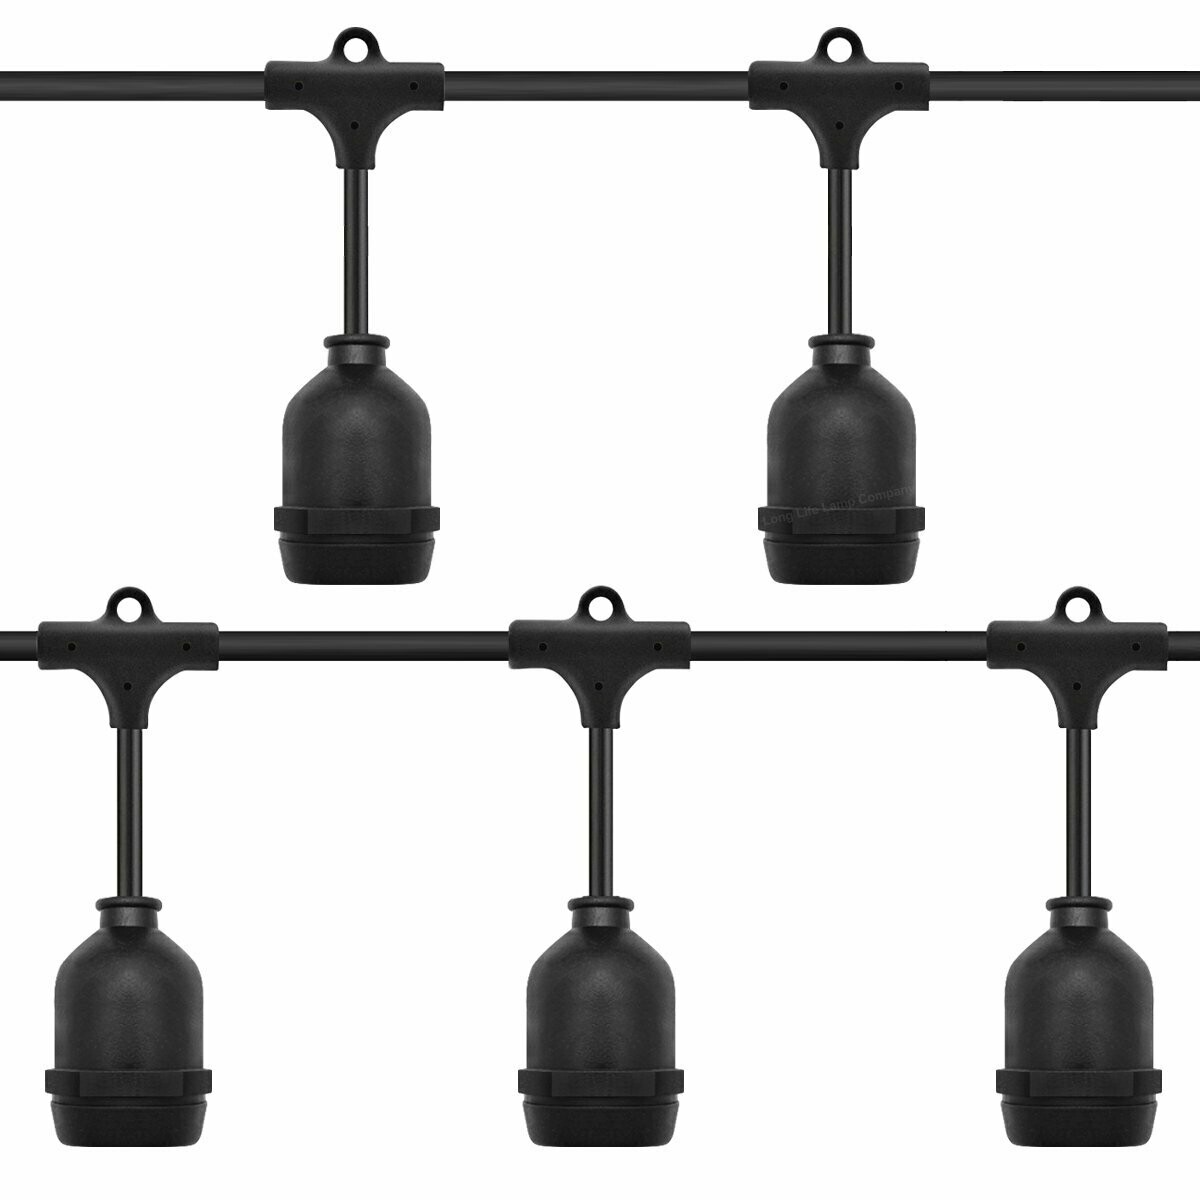 STRING LIGHT BLACK IP65 (waterproof for outdoor use) with 2 x E27 lamp holders by linear meter